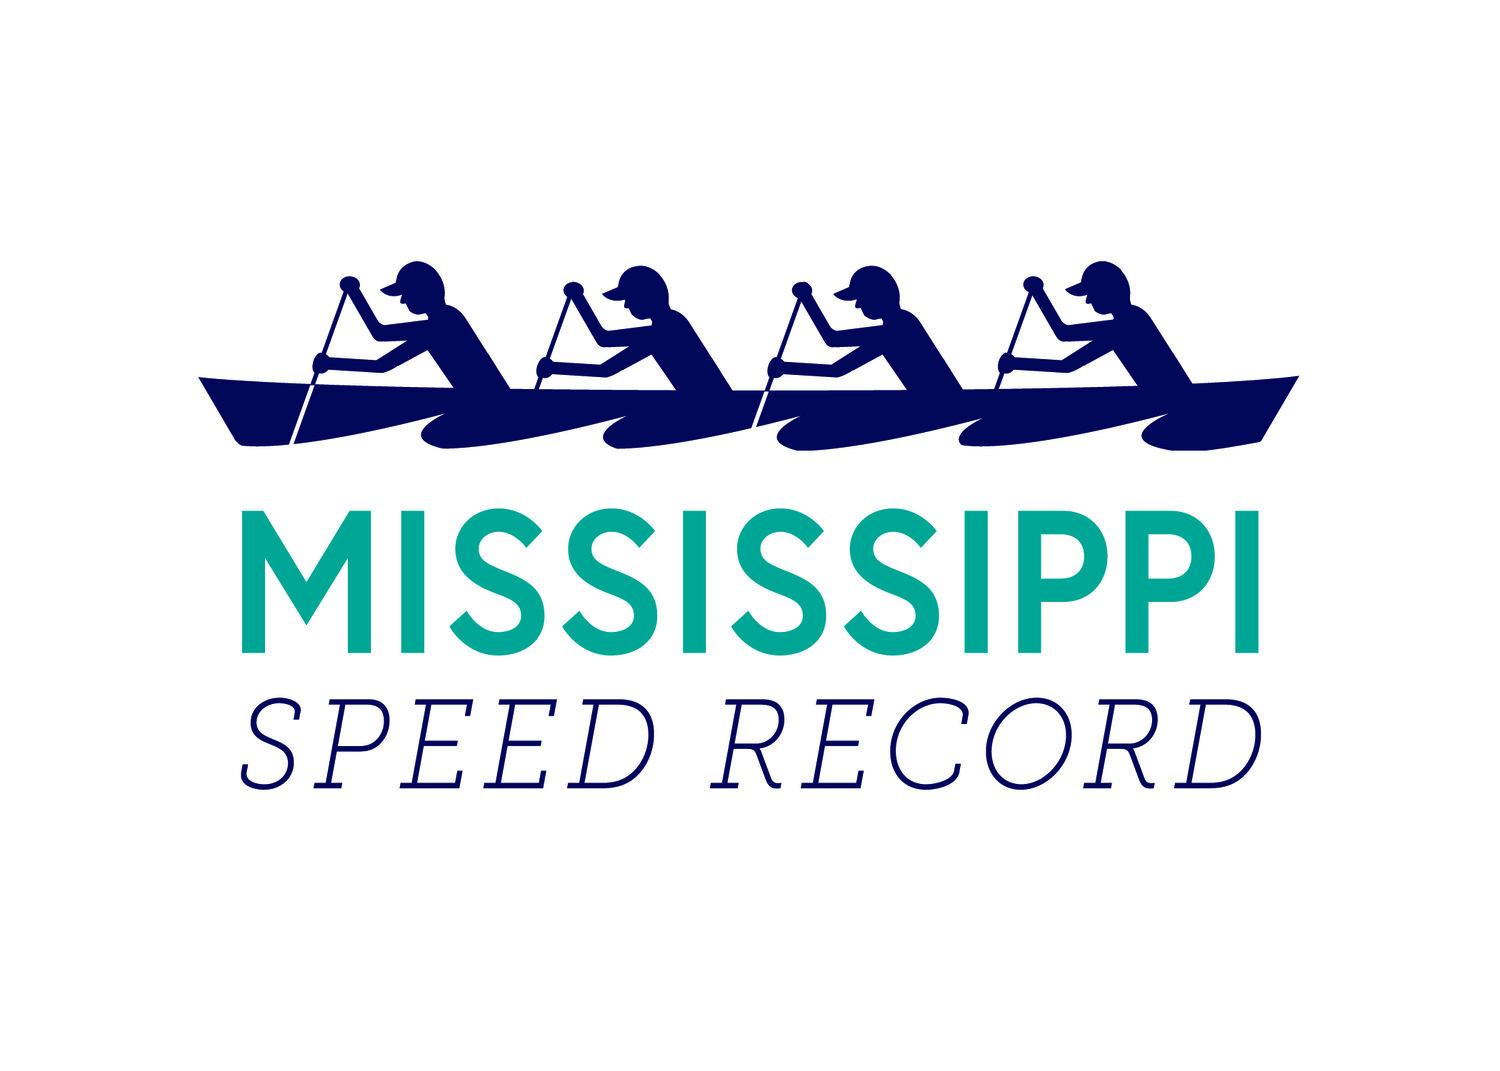 Mississippi Speed Record